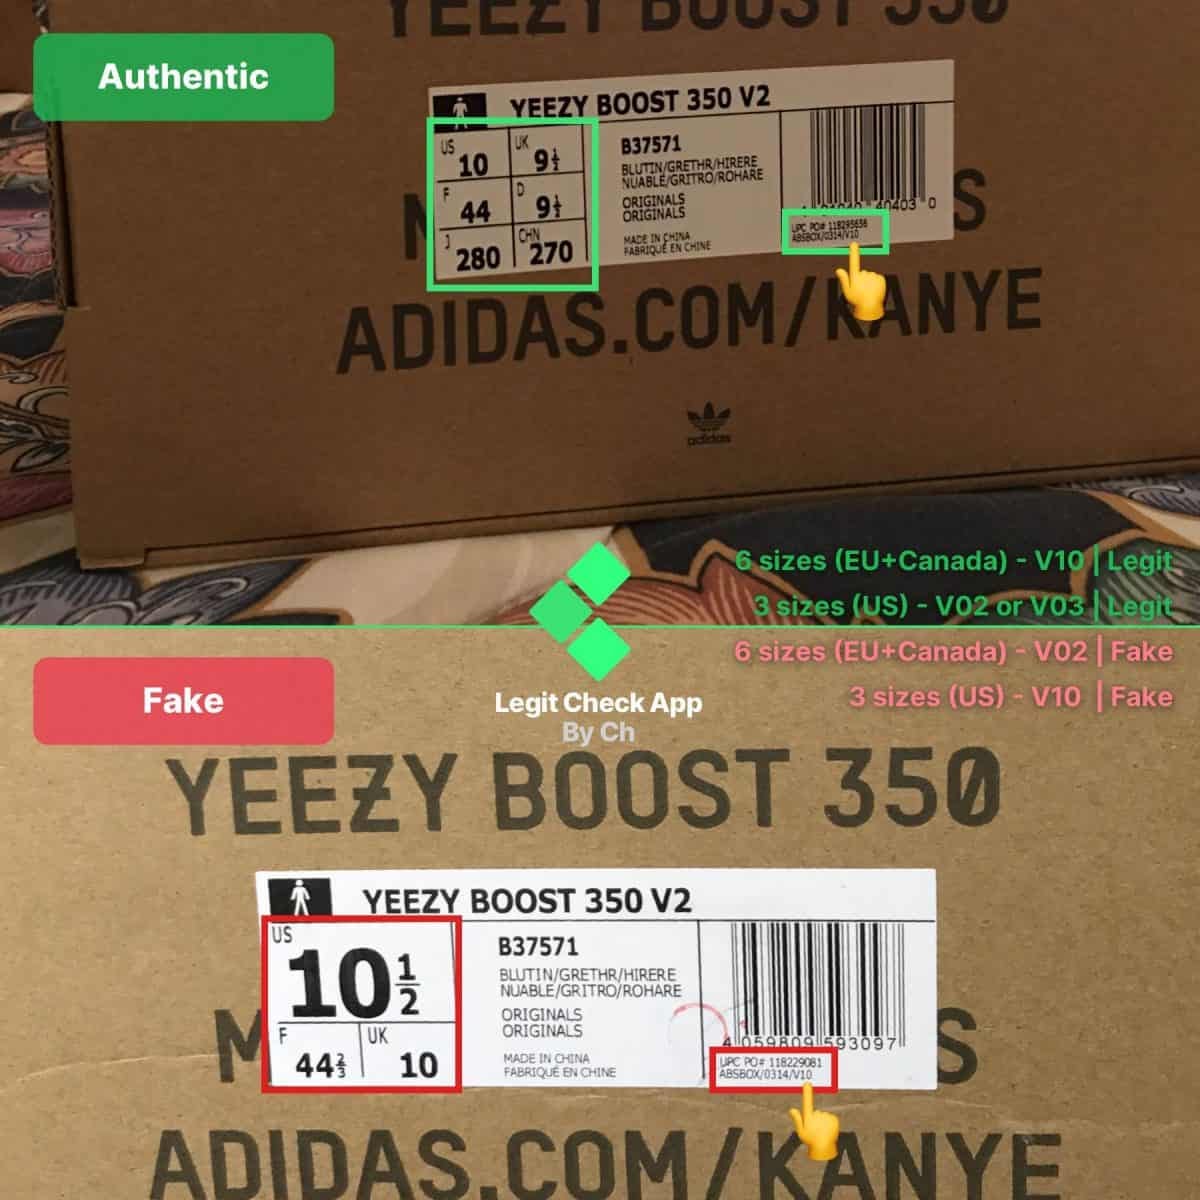 yeezy boost 350 real vs fake